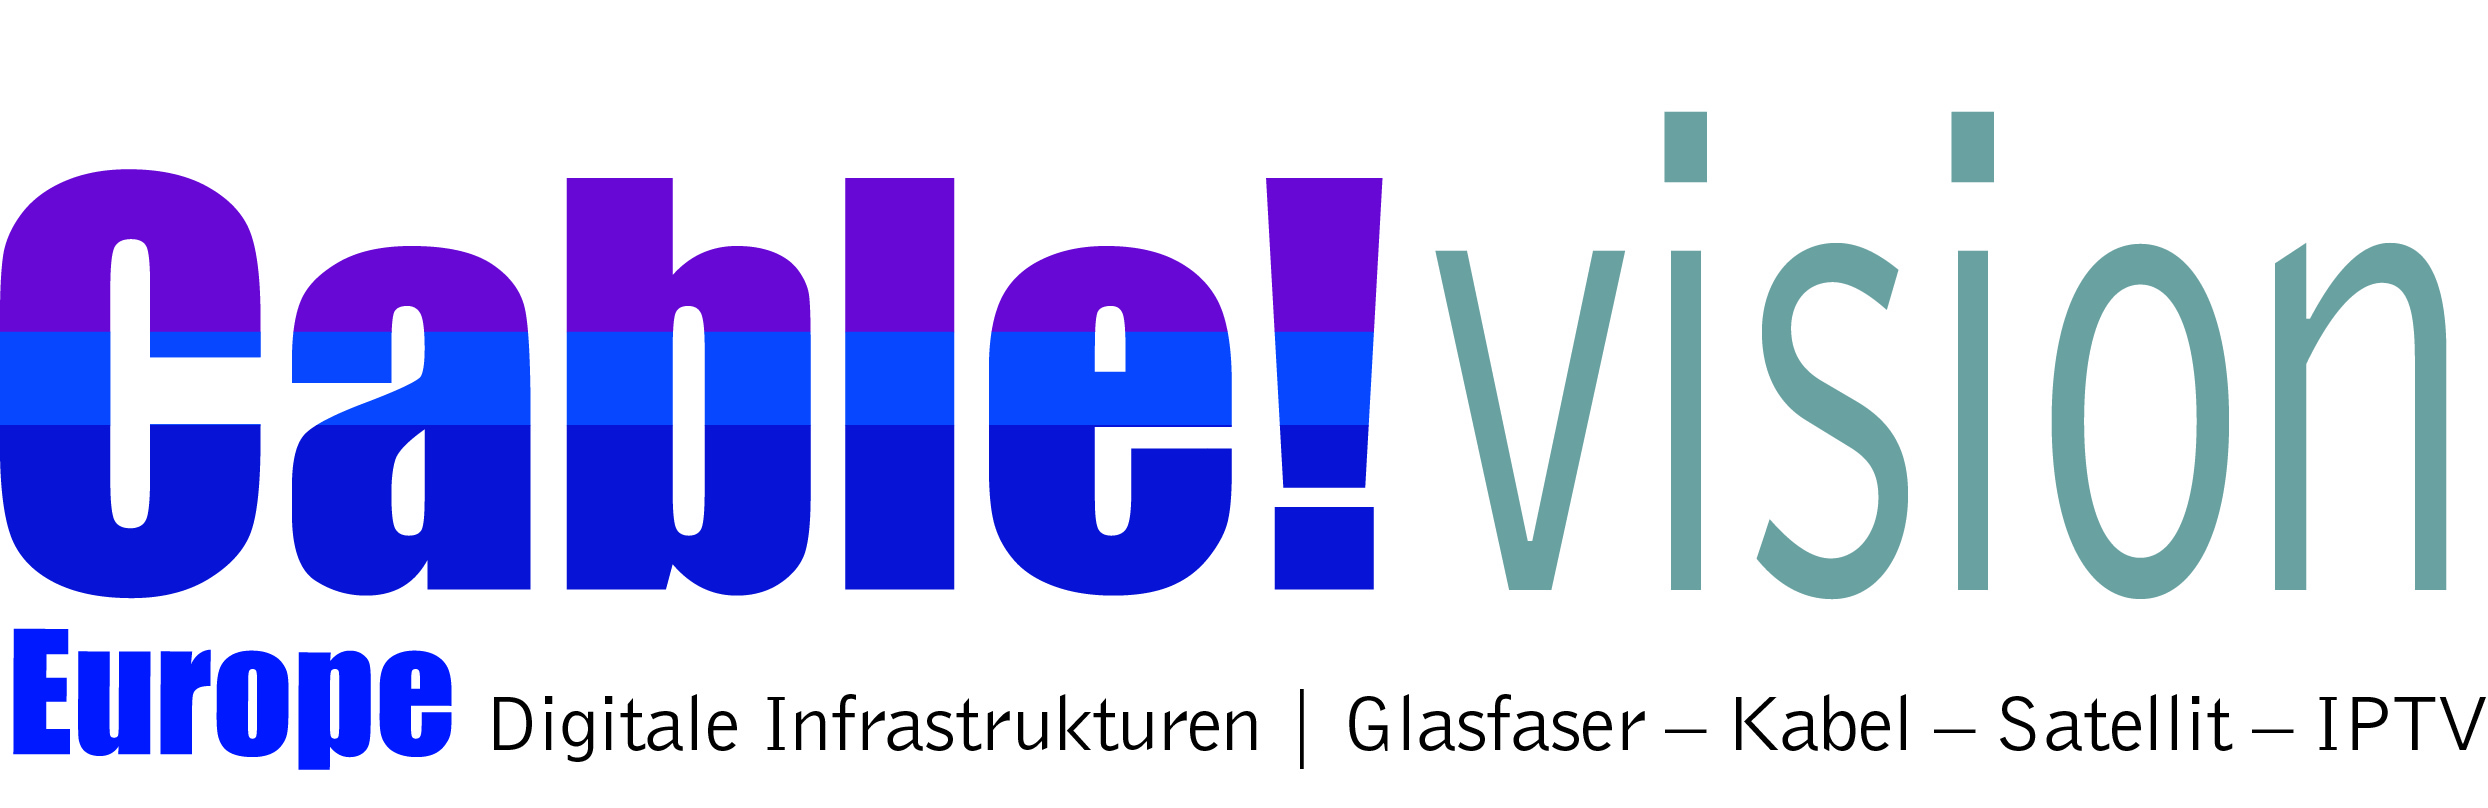 New Business Verlag/Cable!vision Europe